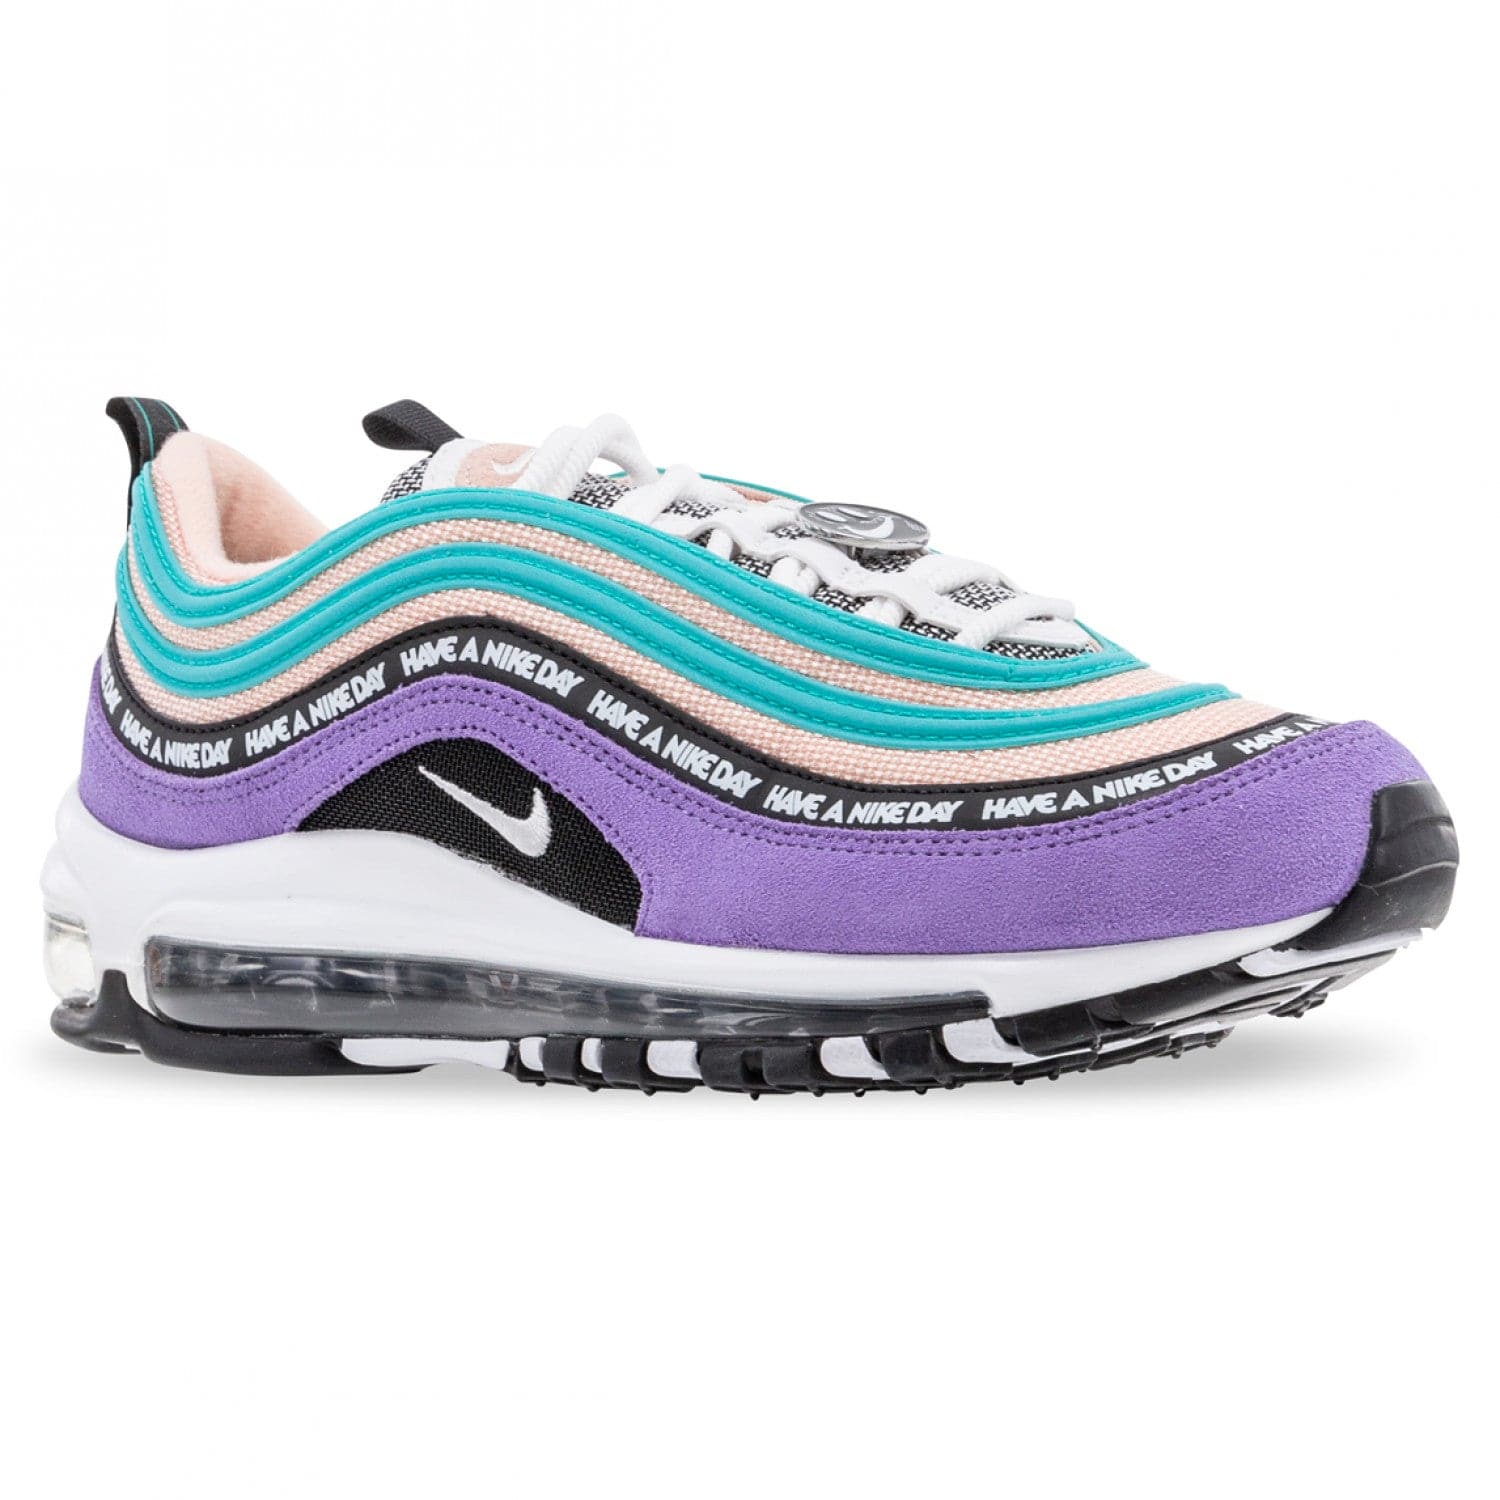 Nike’s Air Max “Have A Nike Day”